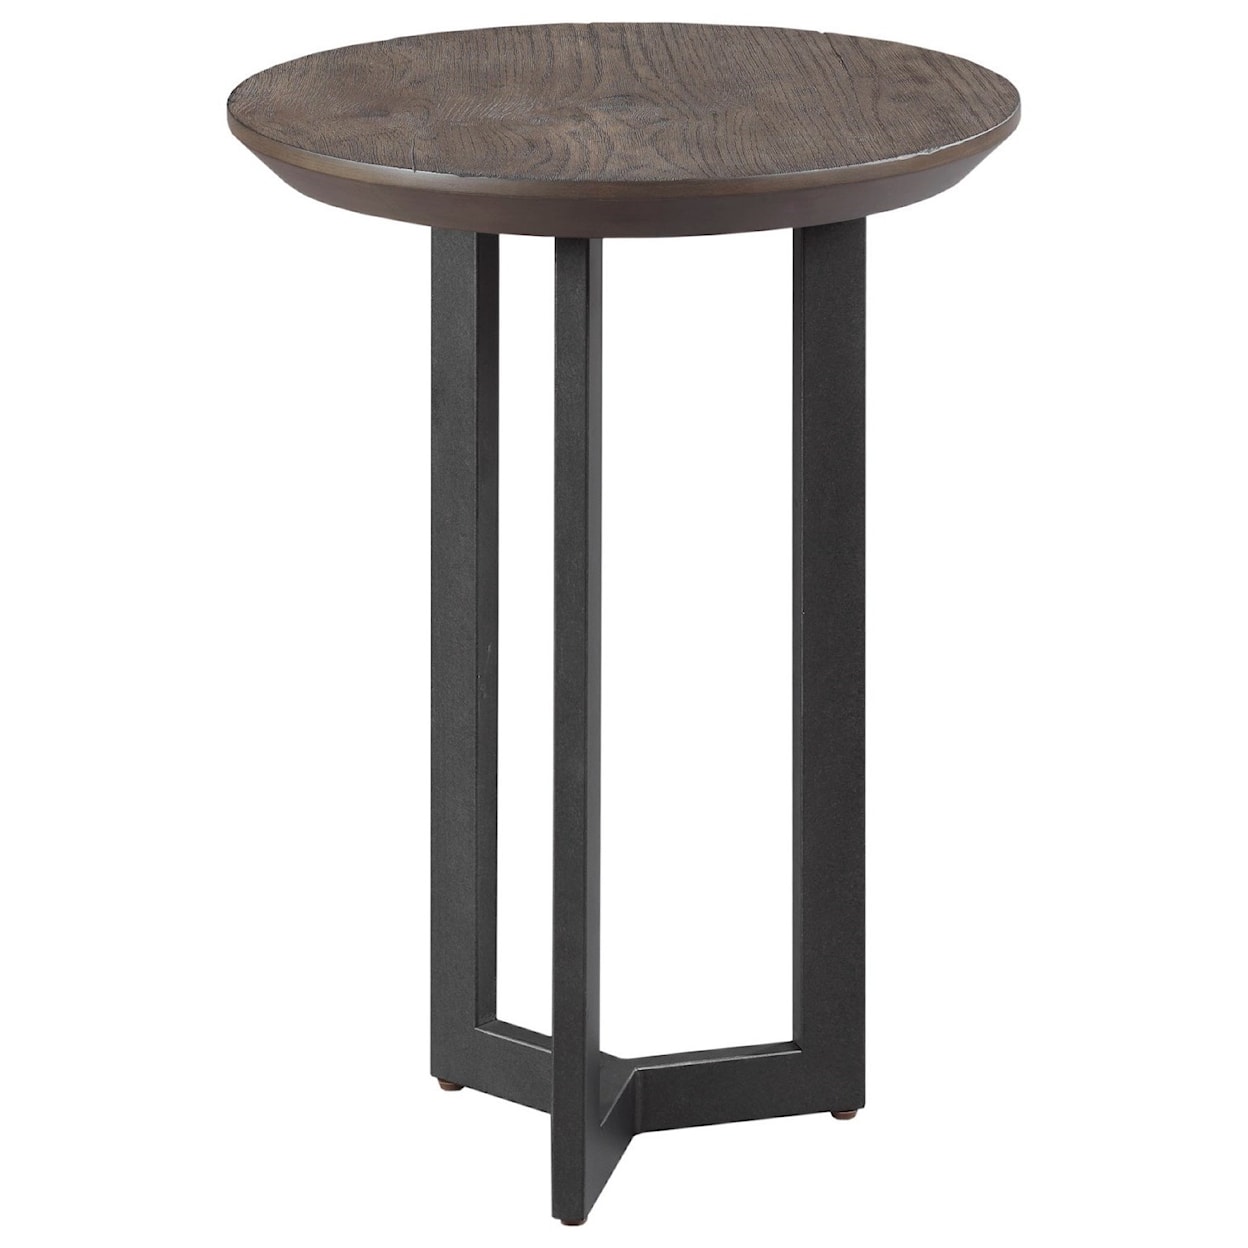 Dimensions Graystone Round Chairside Table